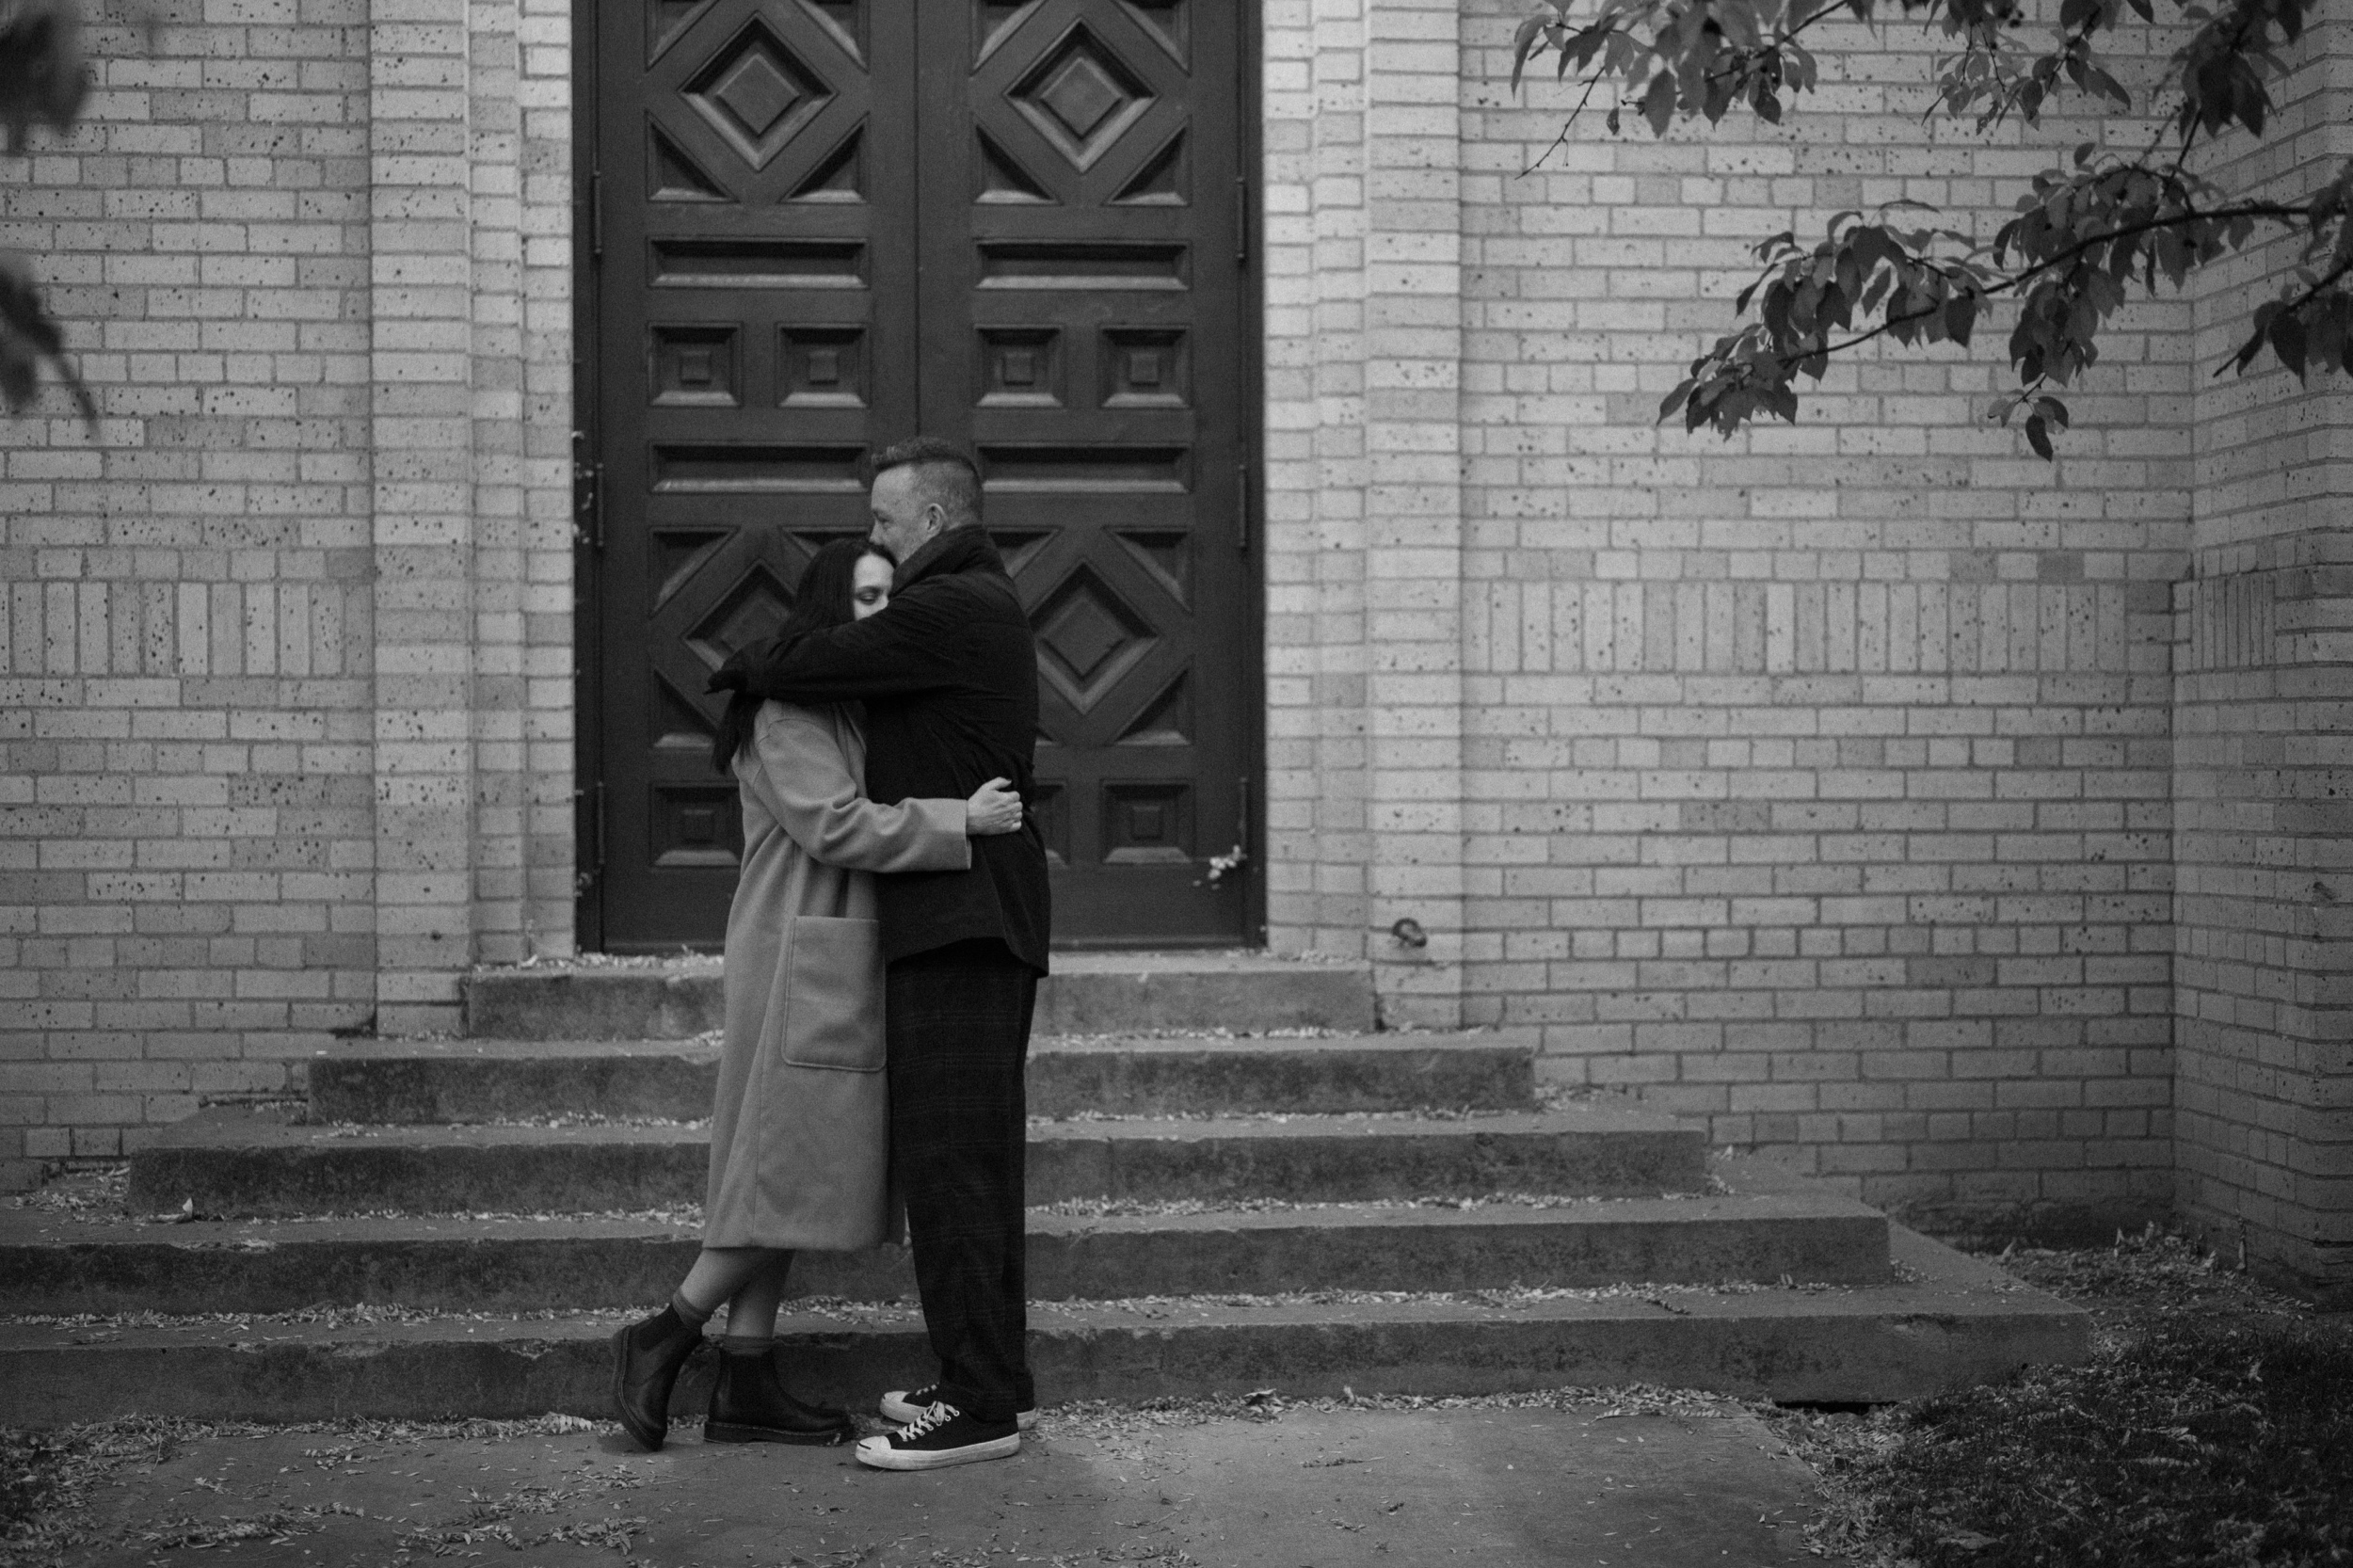 A black and white photo of an engaged couple embracing one another in front of The Smiley Building in Durango, Colorado for their engagement session, taken by Colorado wedding photographer, Ashley Joyce.